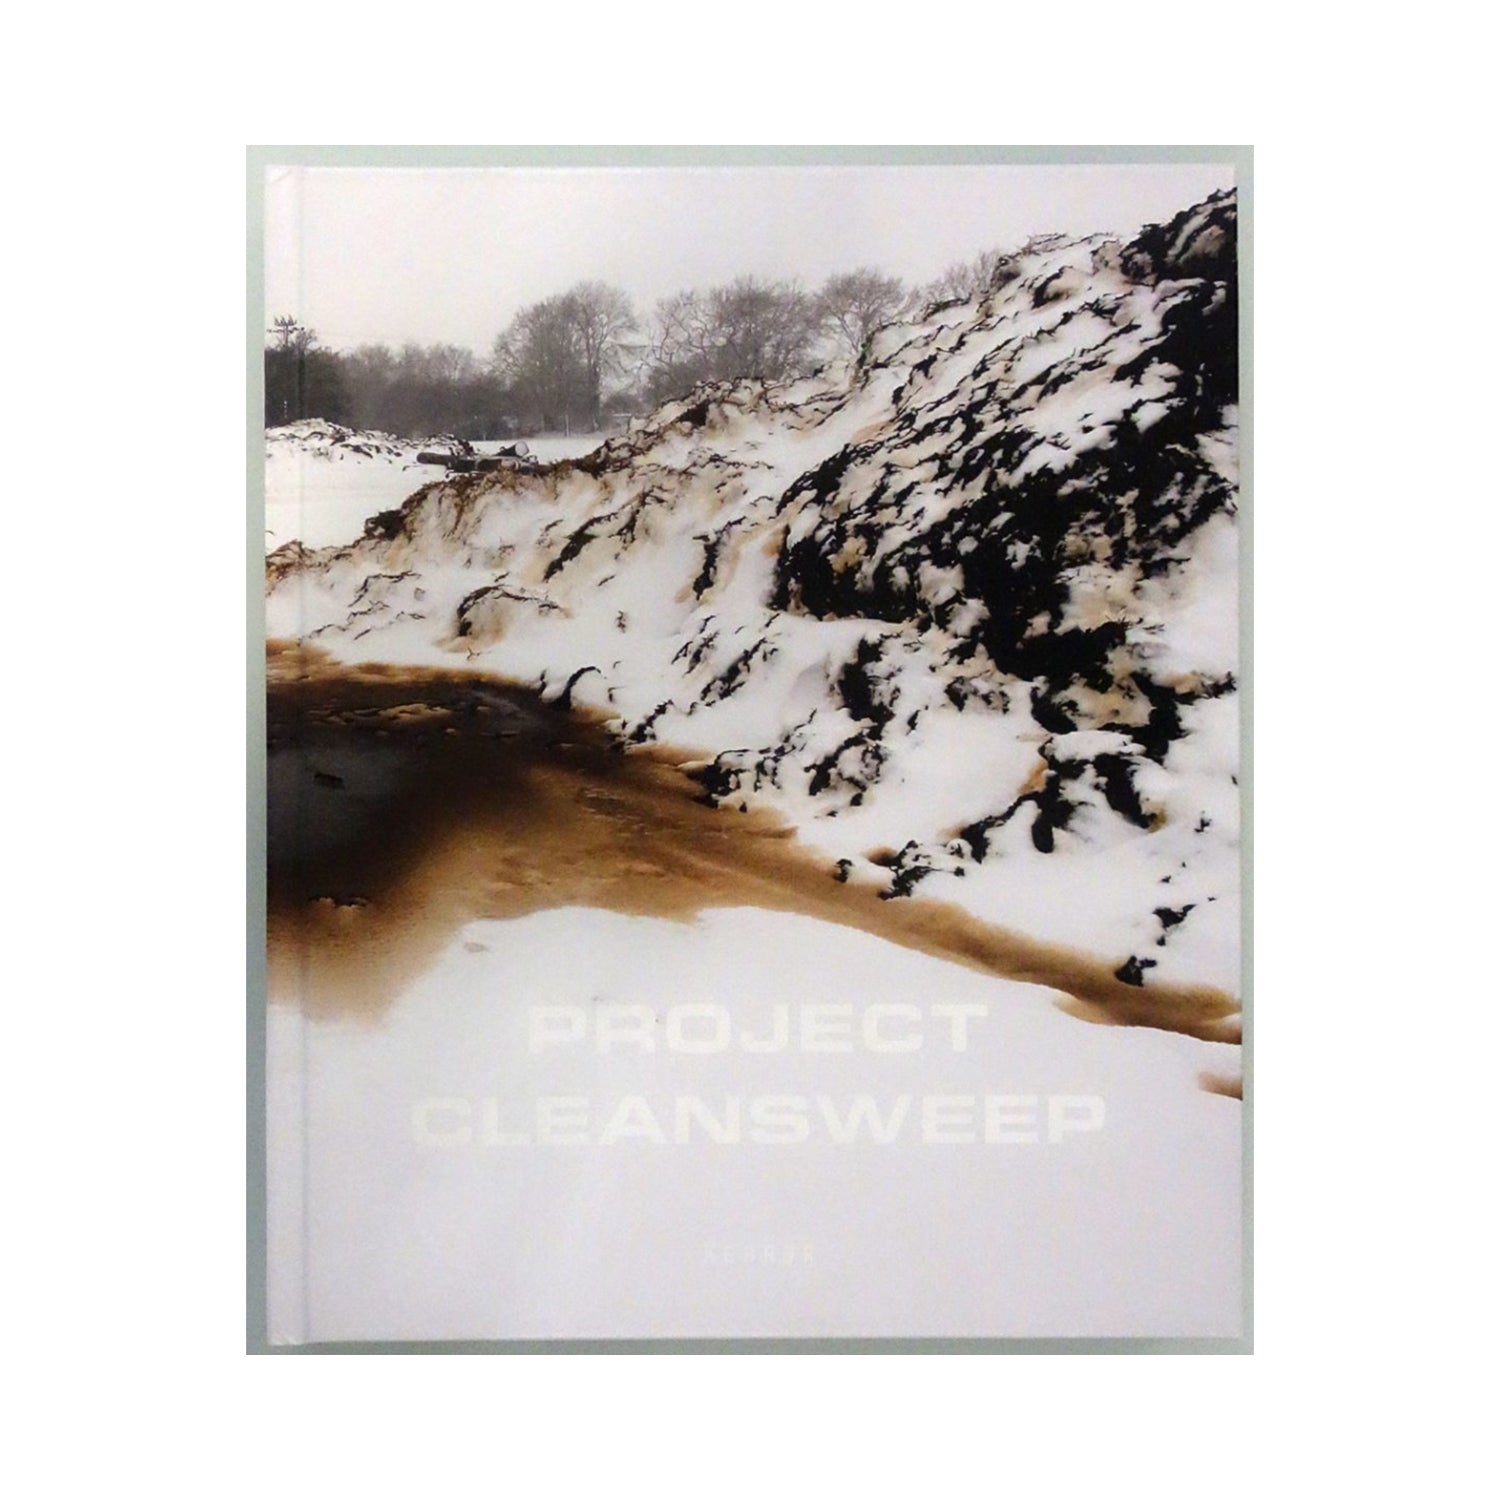 Project Cleansweep Photo Museum Ireland